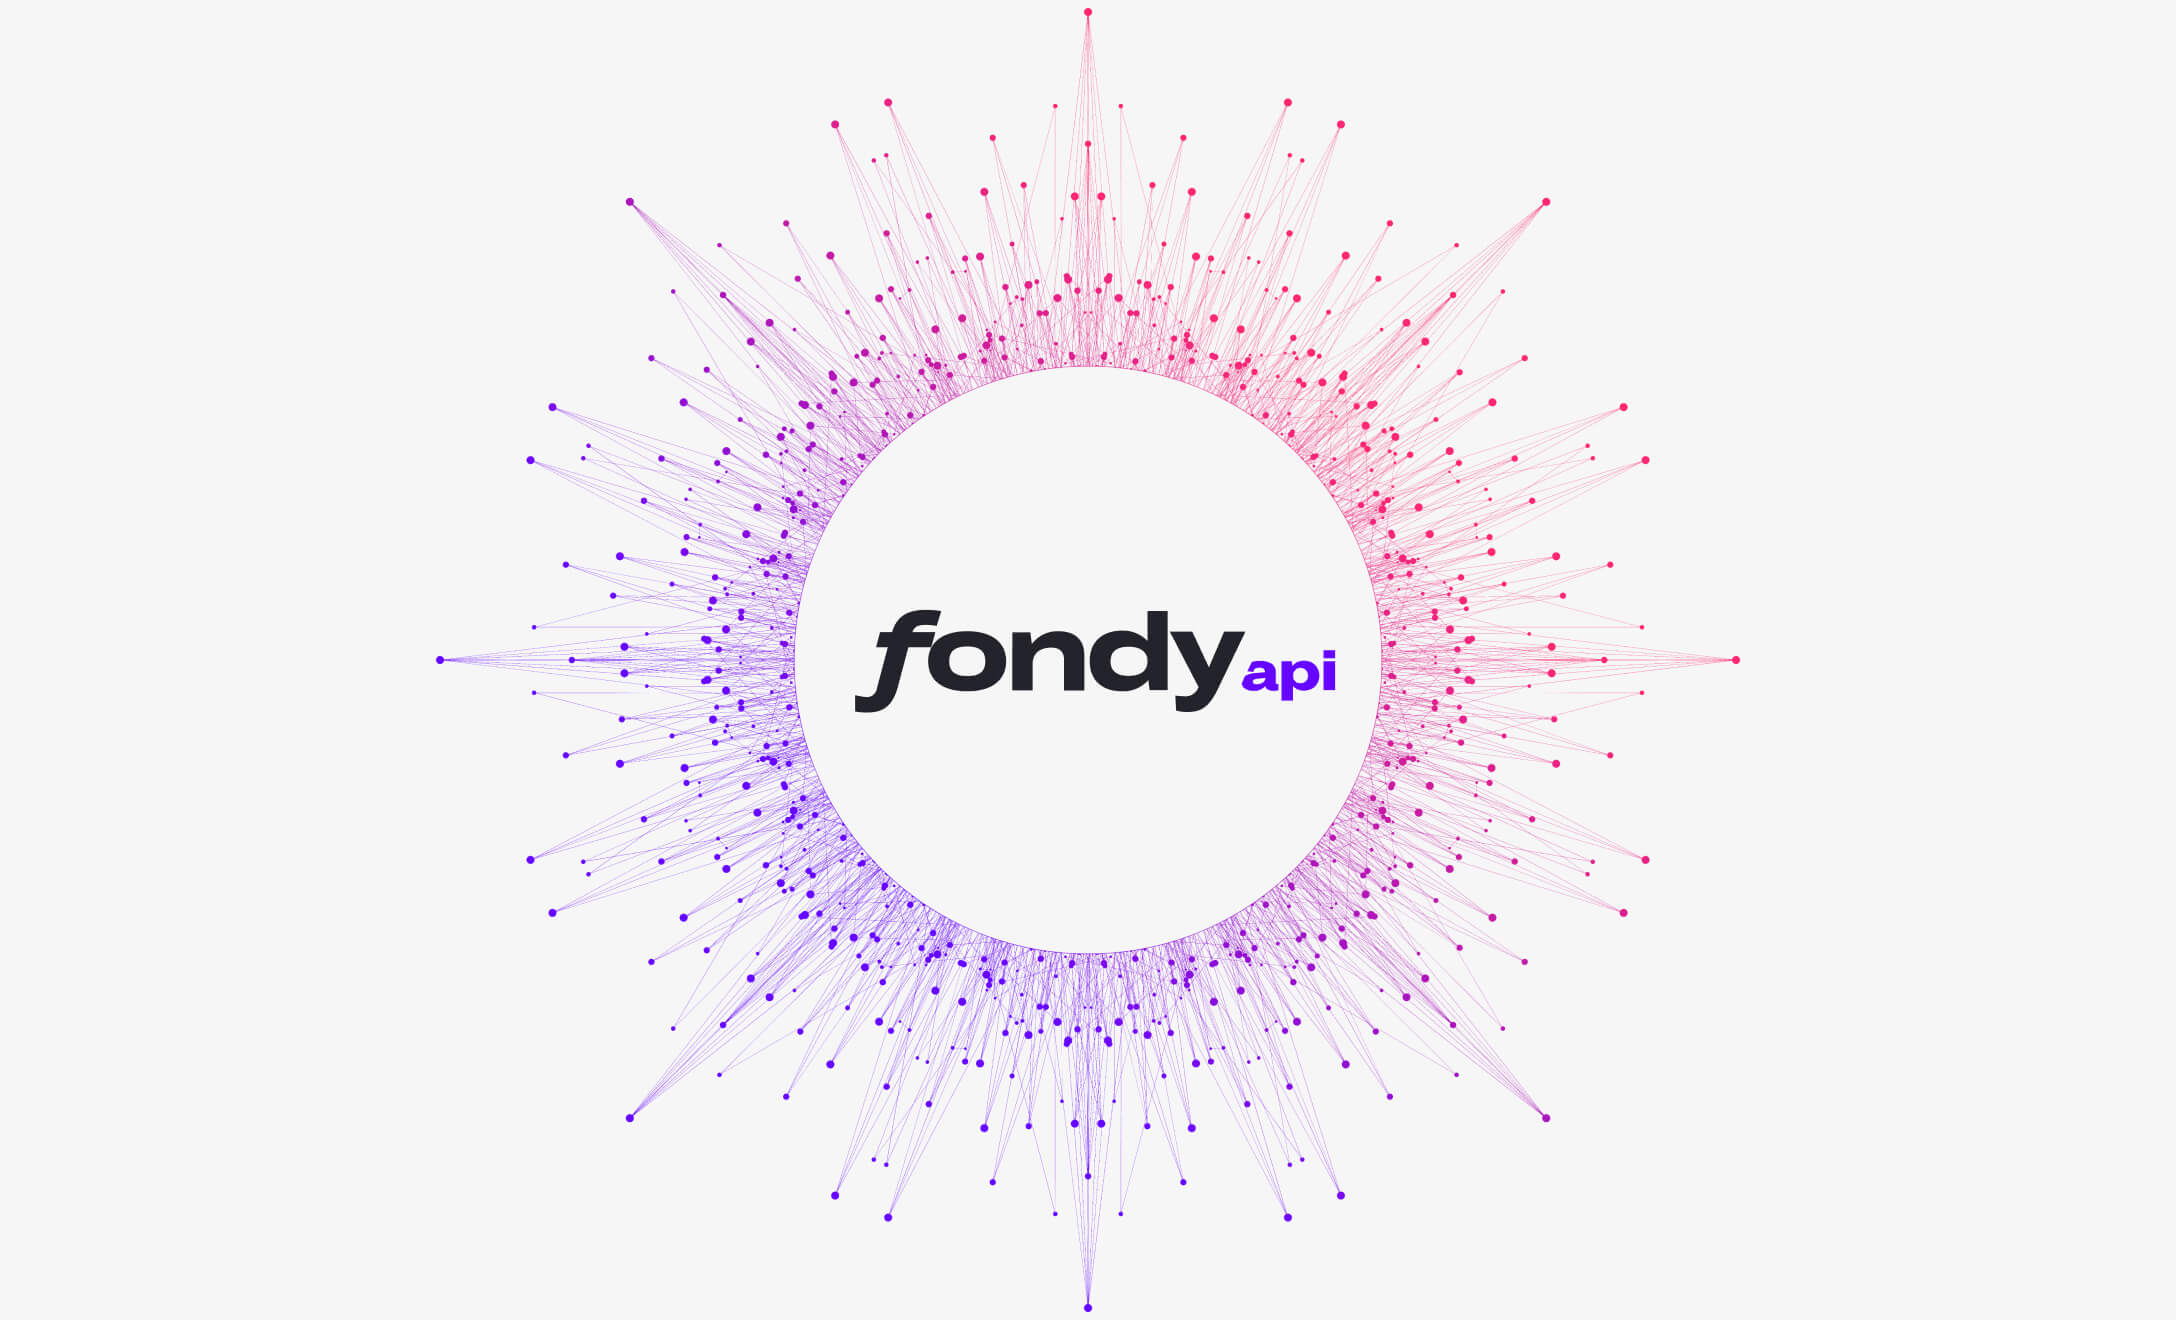 Introducing seamless financial operations with Fondy’s new API access